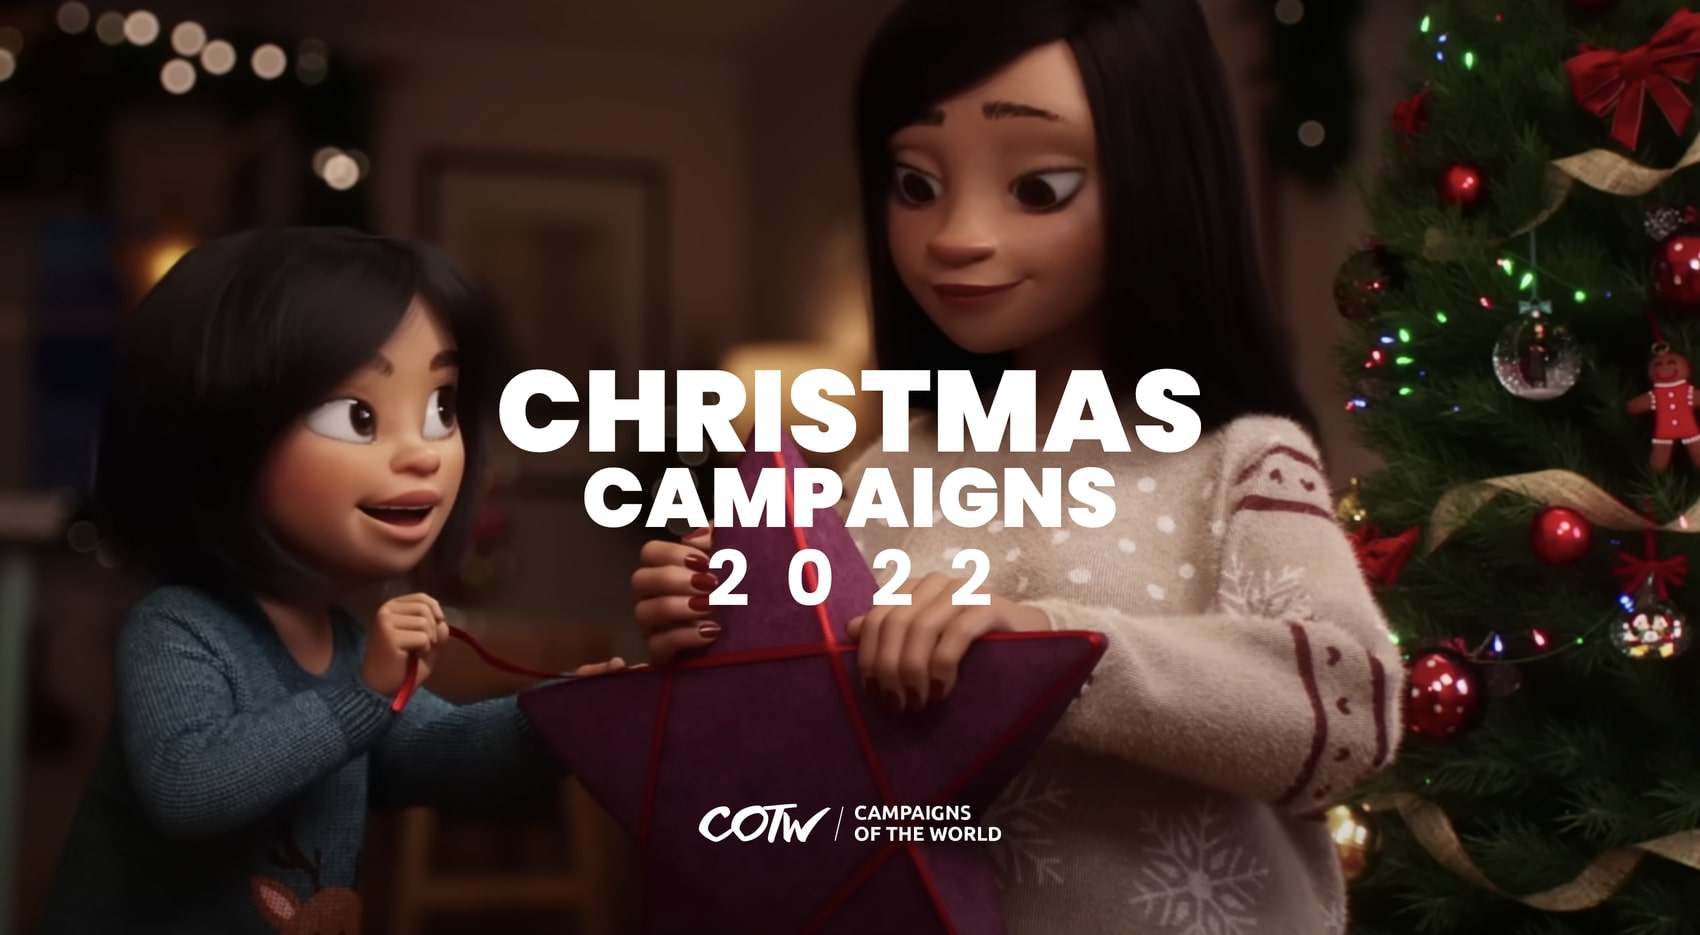 Christmas Campaigns 2022, Campaigns of the World